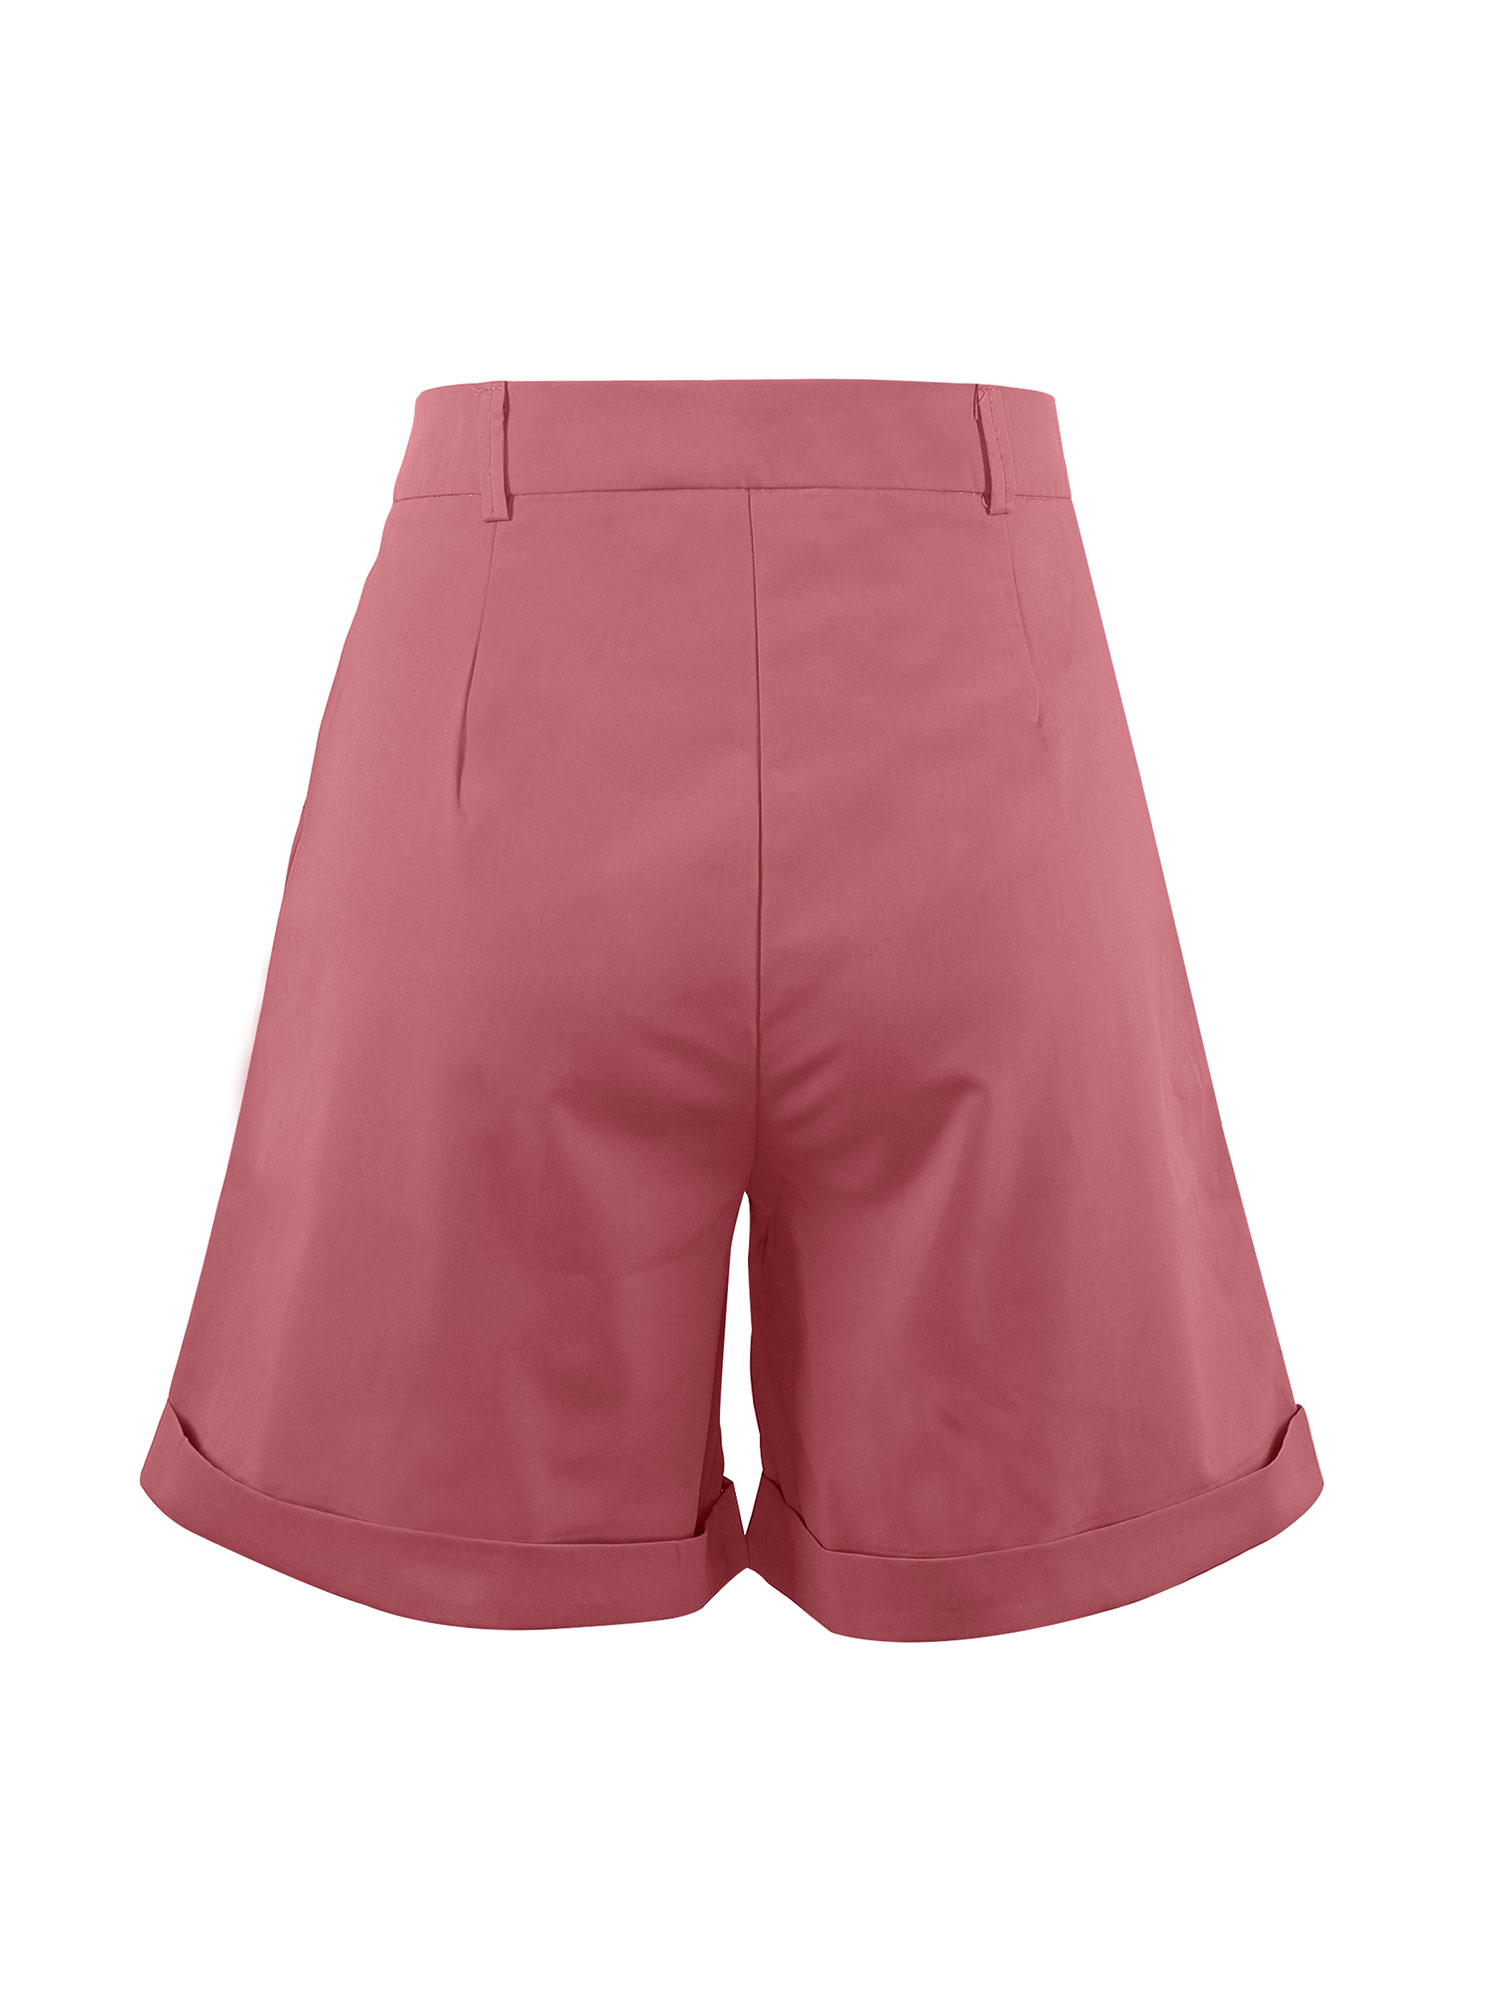 Puloru Women Straight-leg Shorts, Solid Color High Waist Loose Style Pants - image 5 of 9